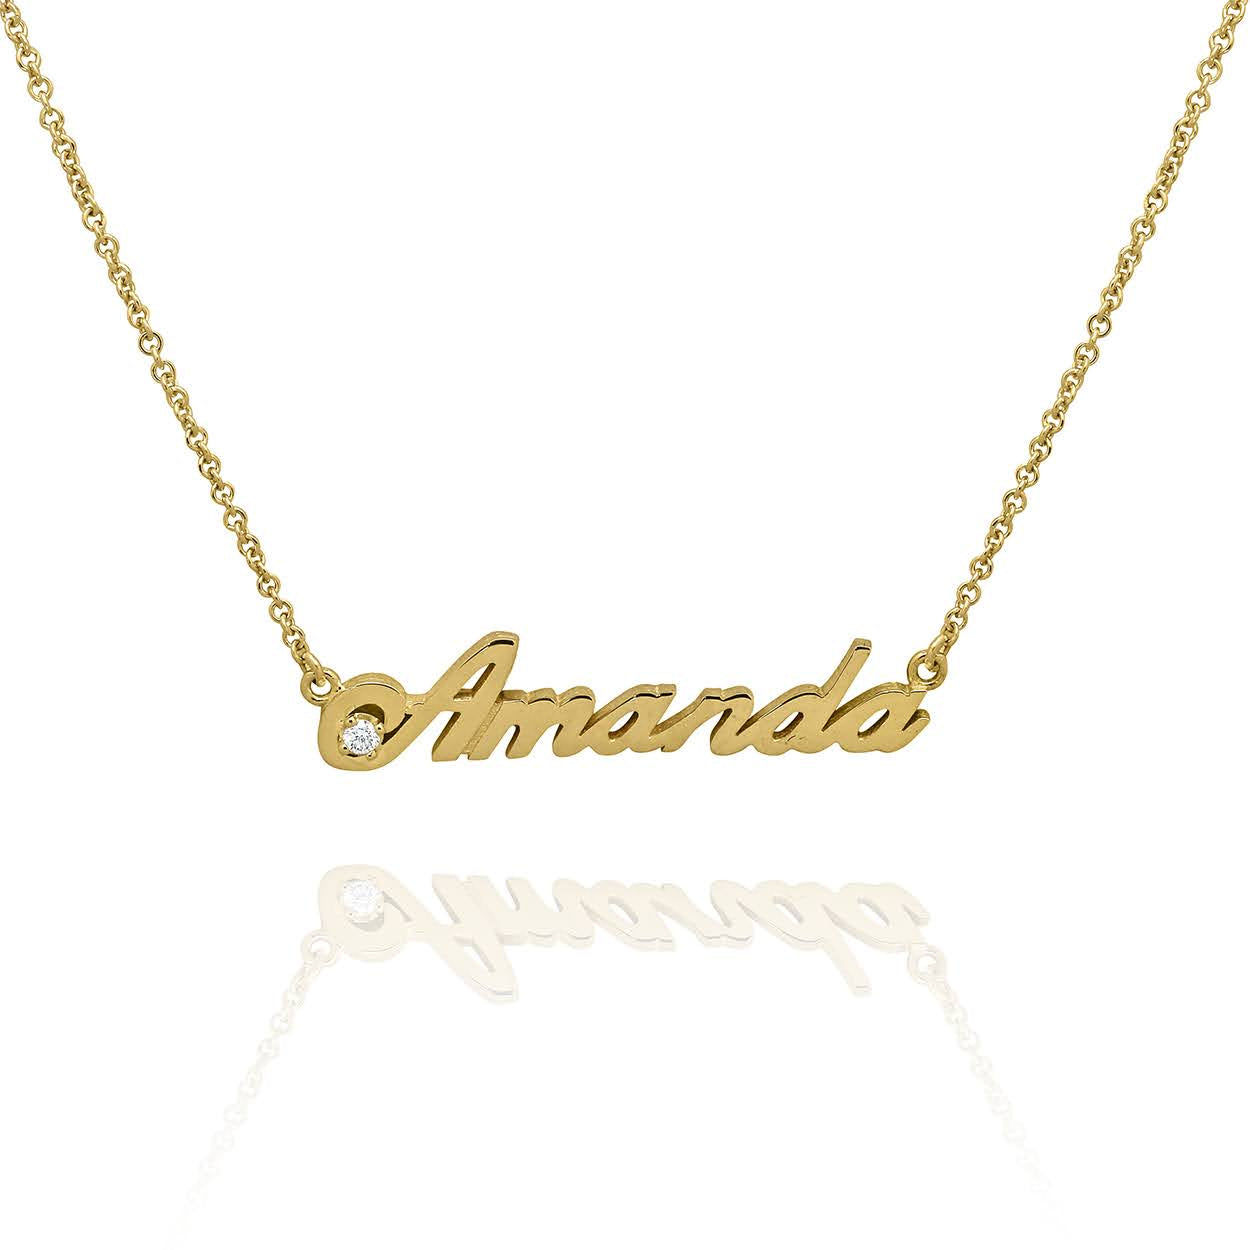 Solid Gold Amanda Name Necklace set with a Diamond